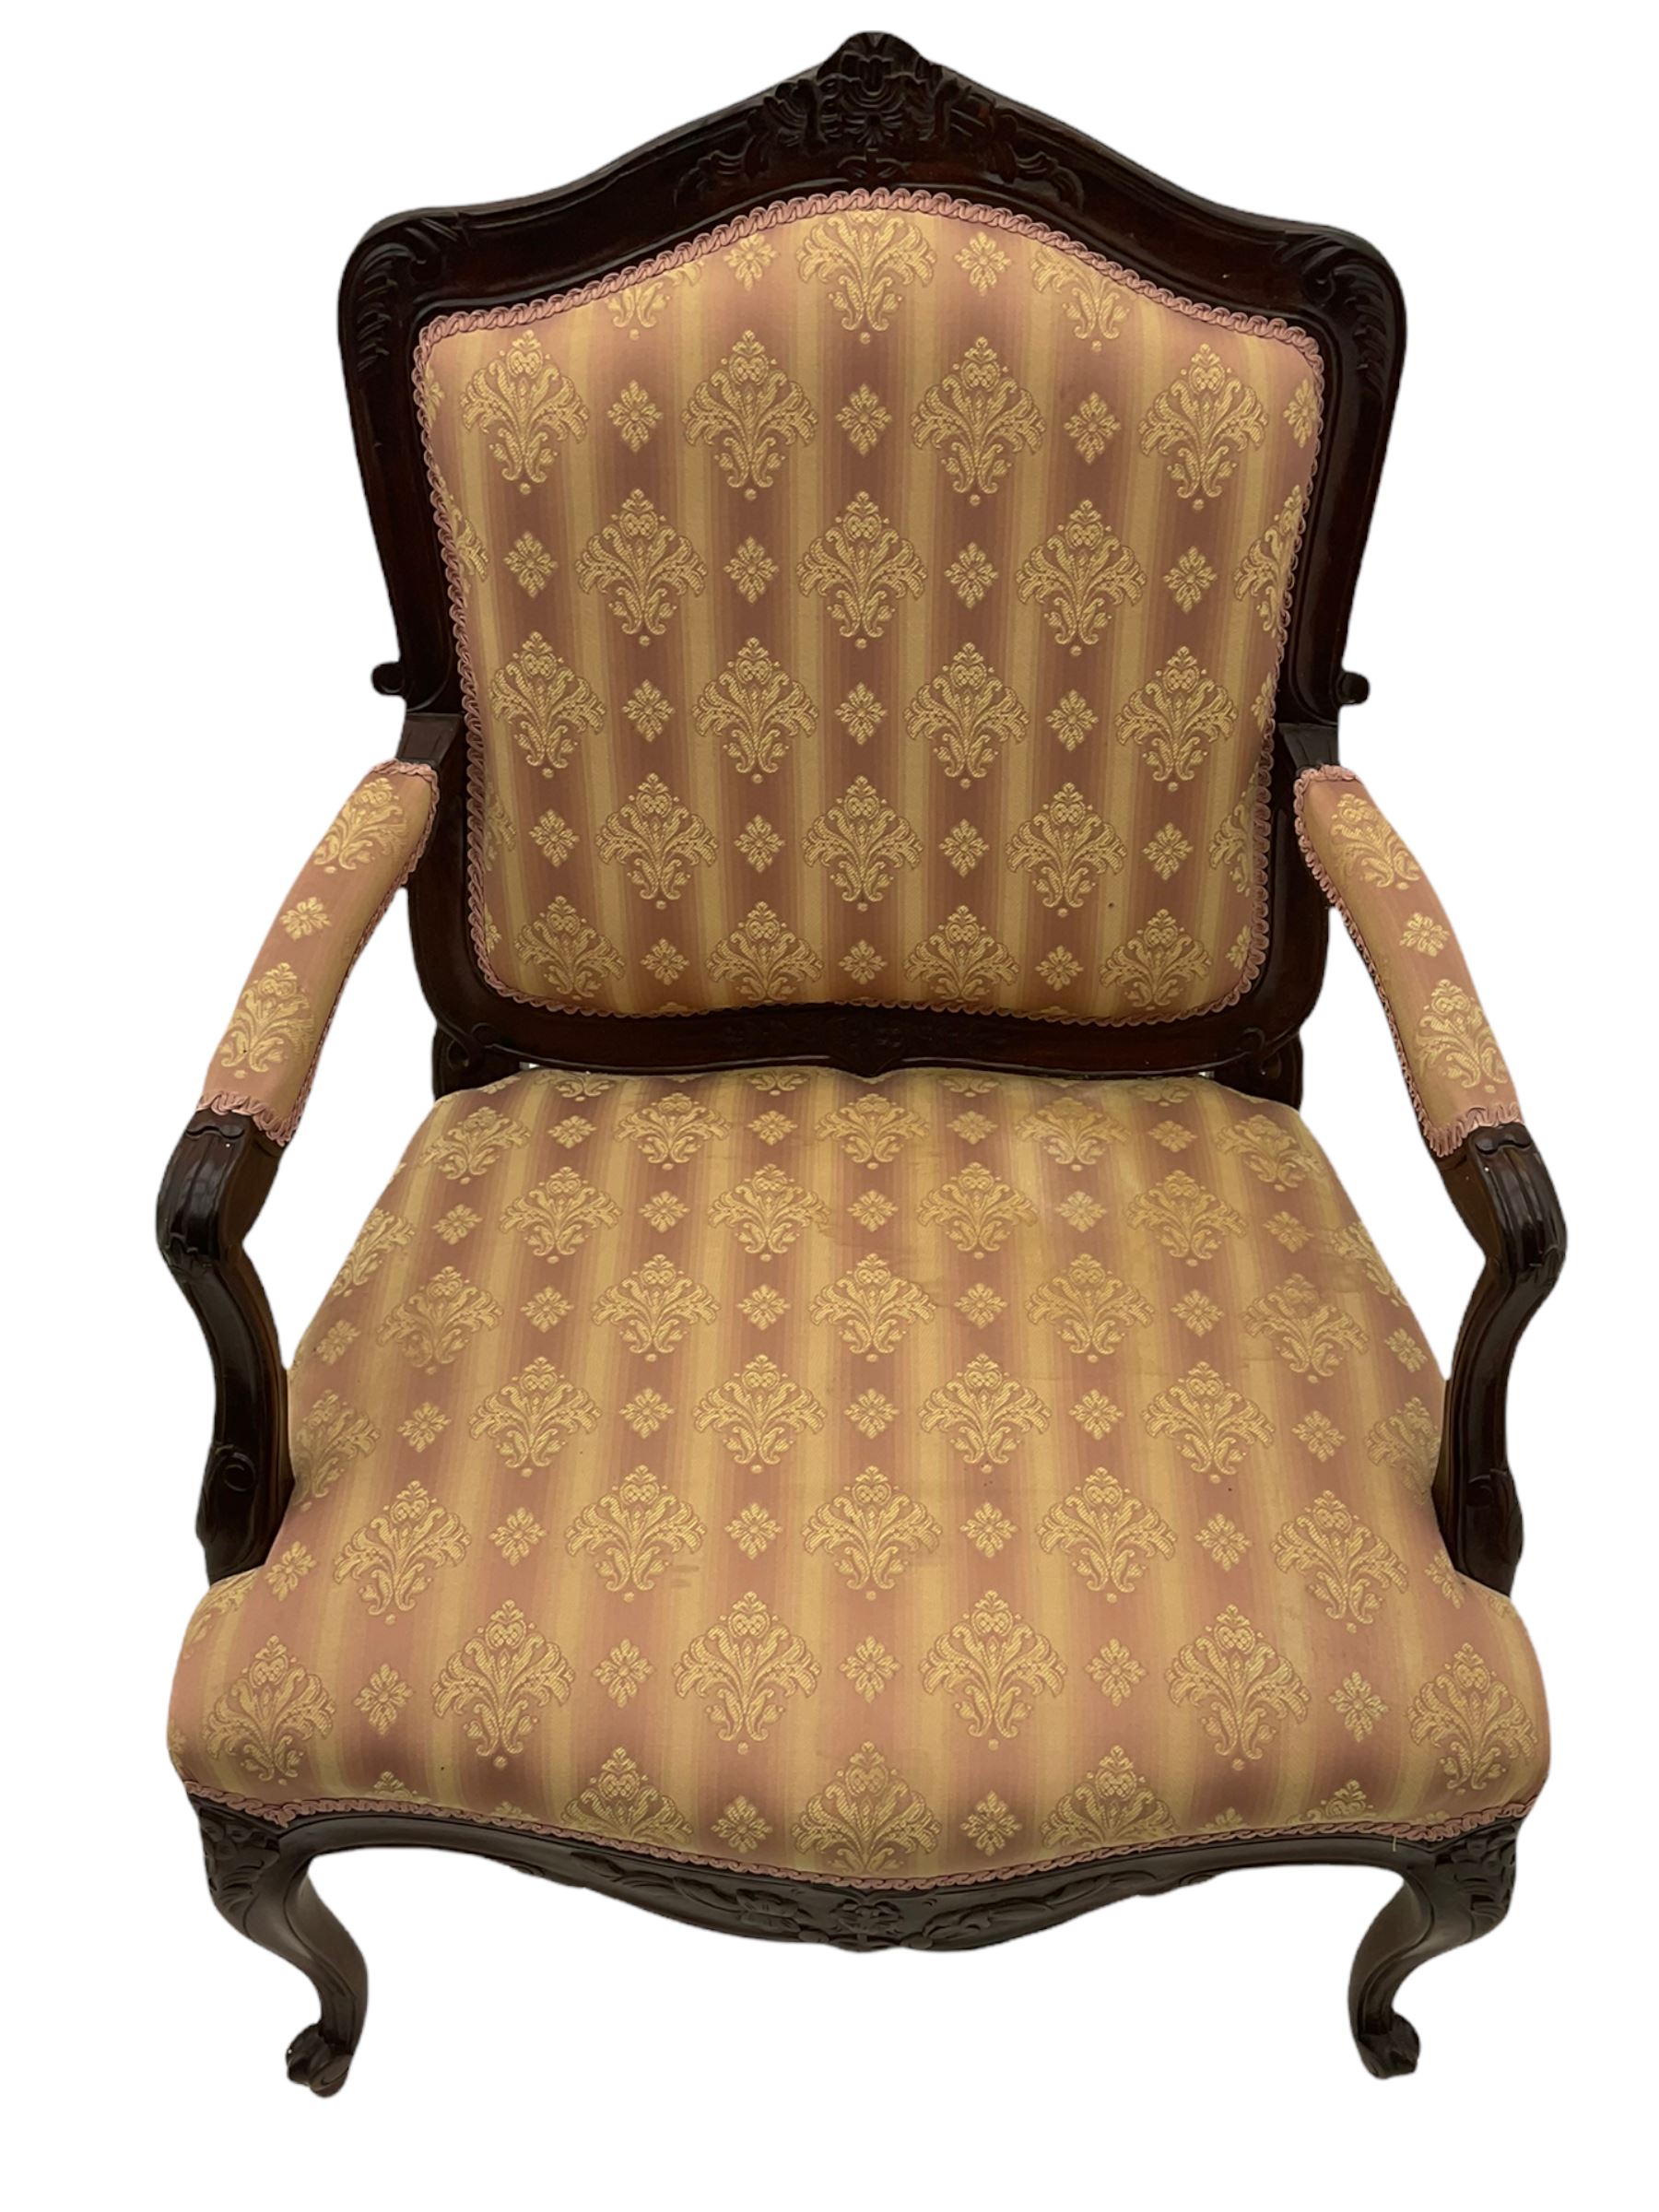 French style walnut framed upholstered armchair - Image 5 of 9